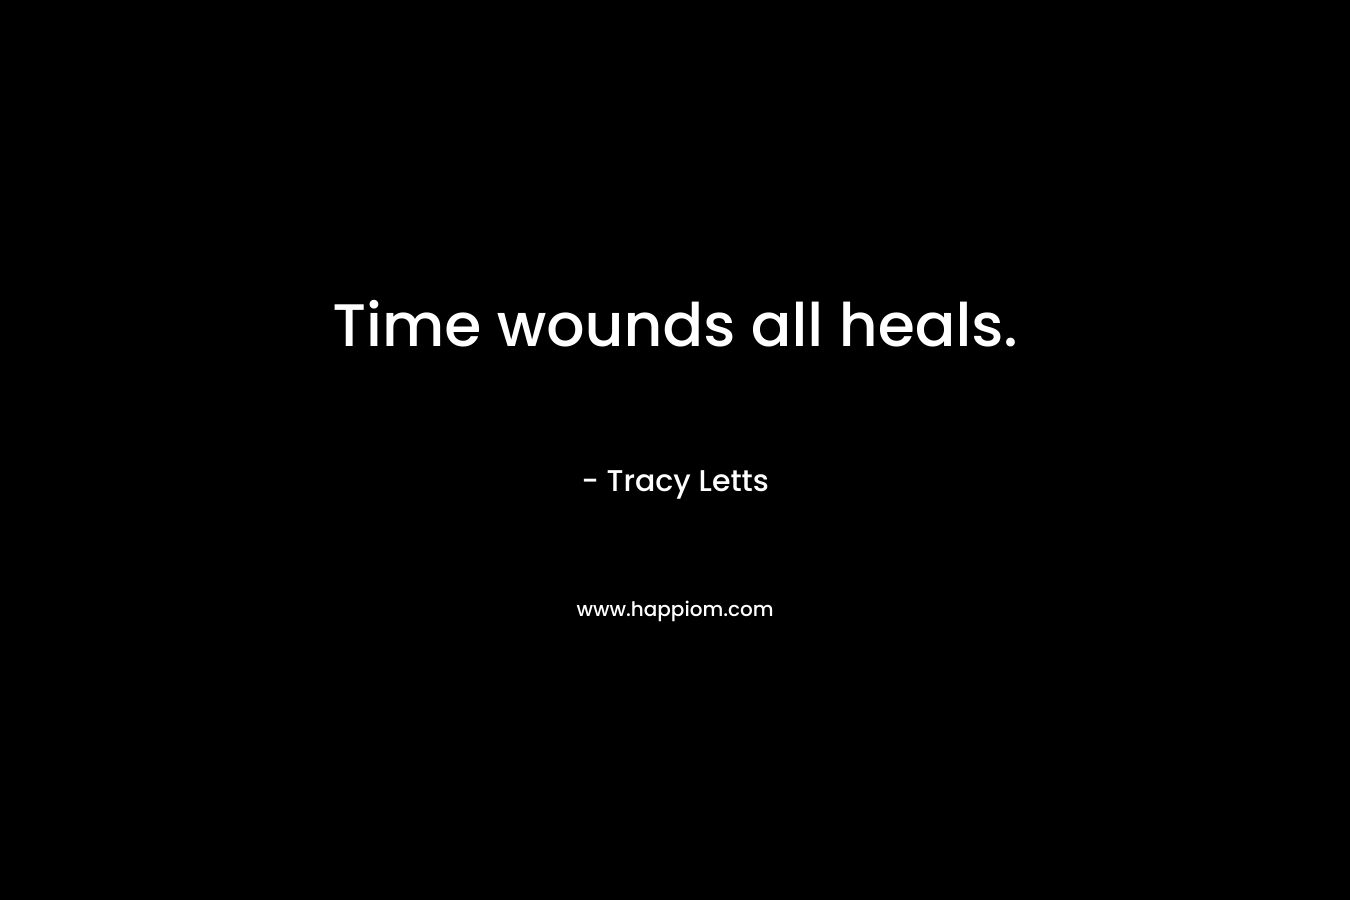 Time wounds all heals.